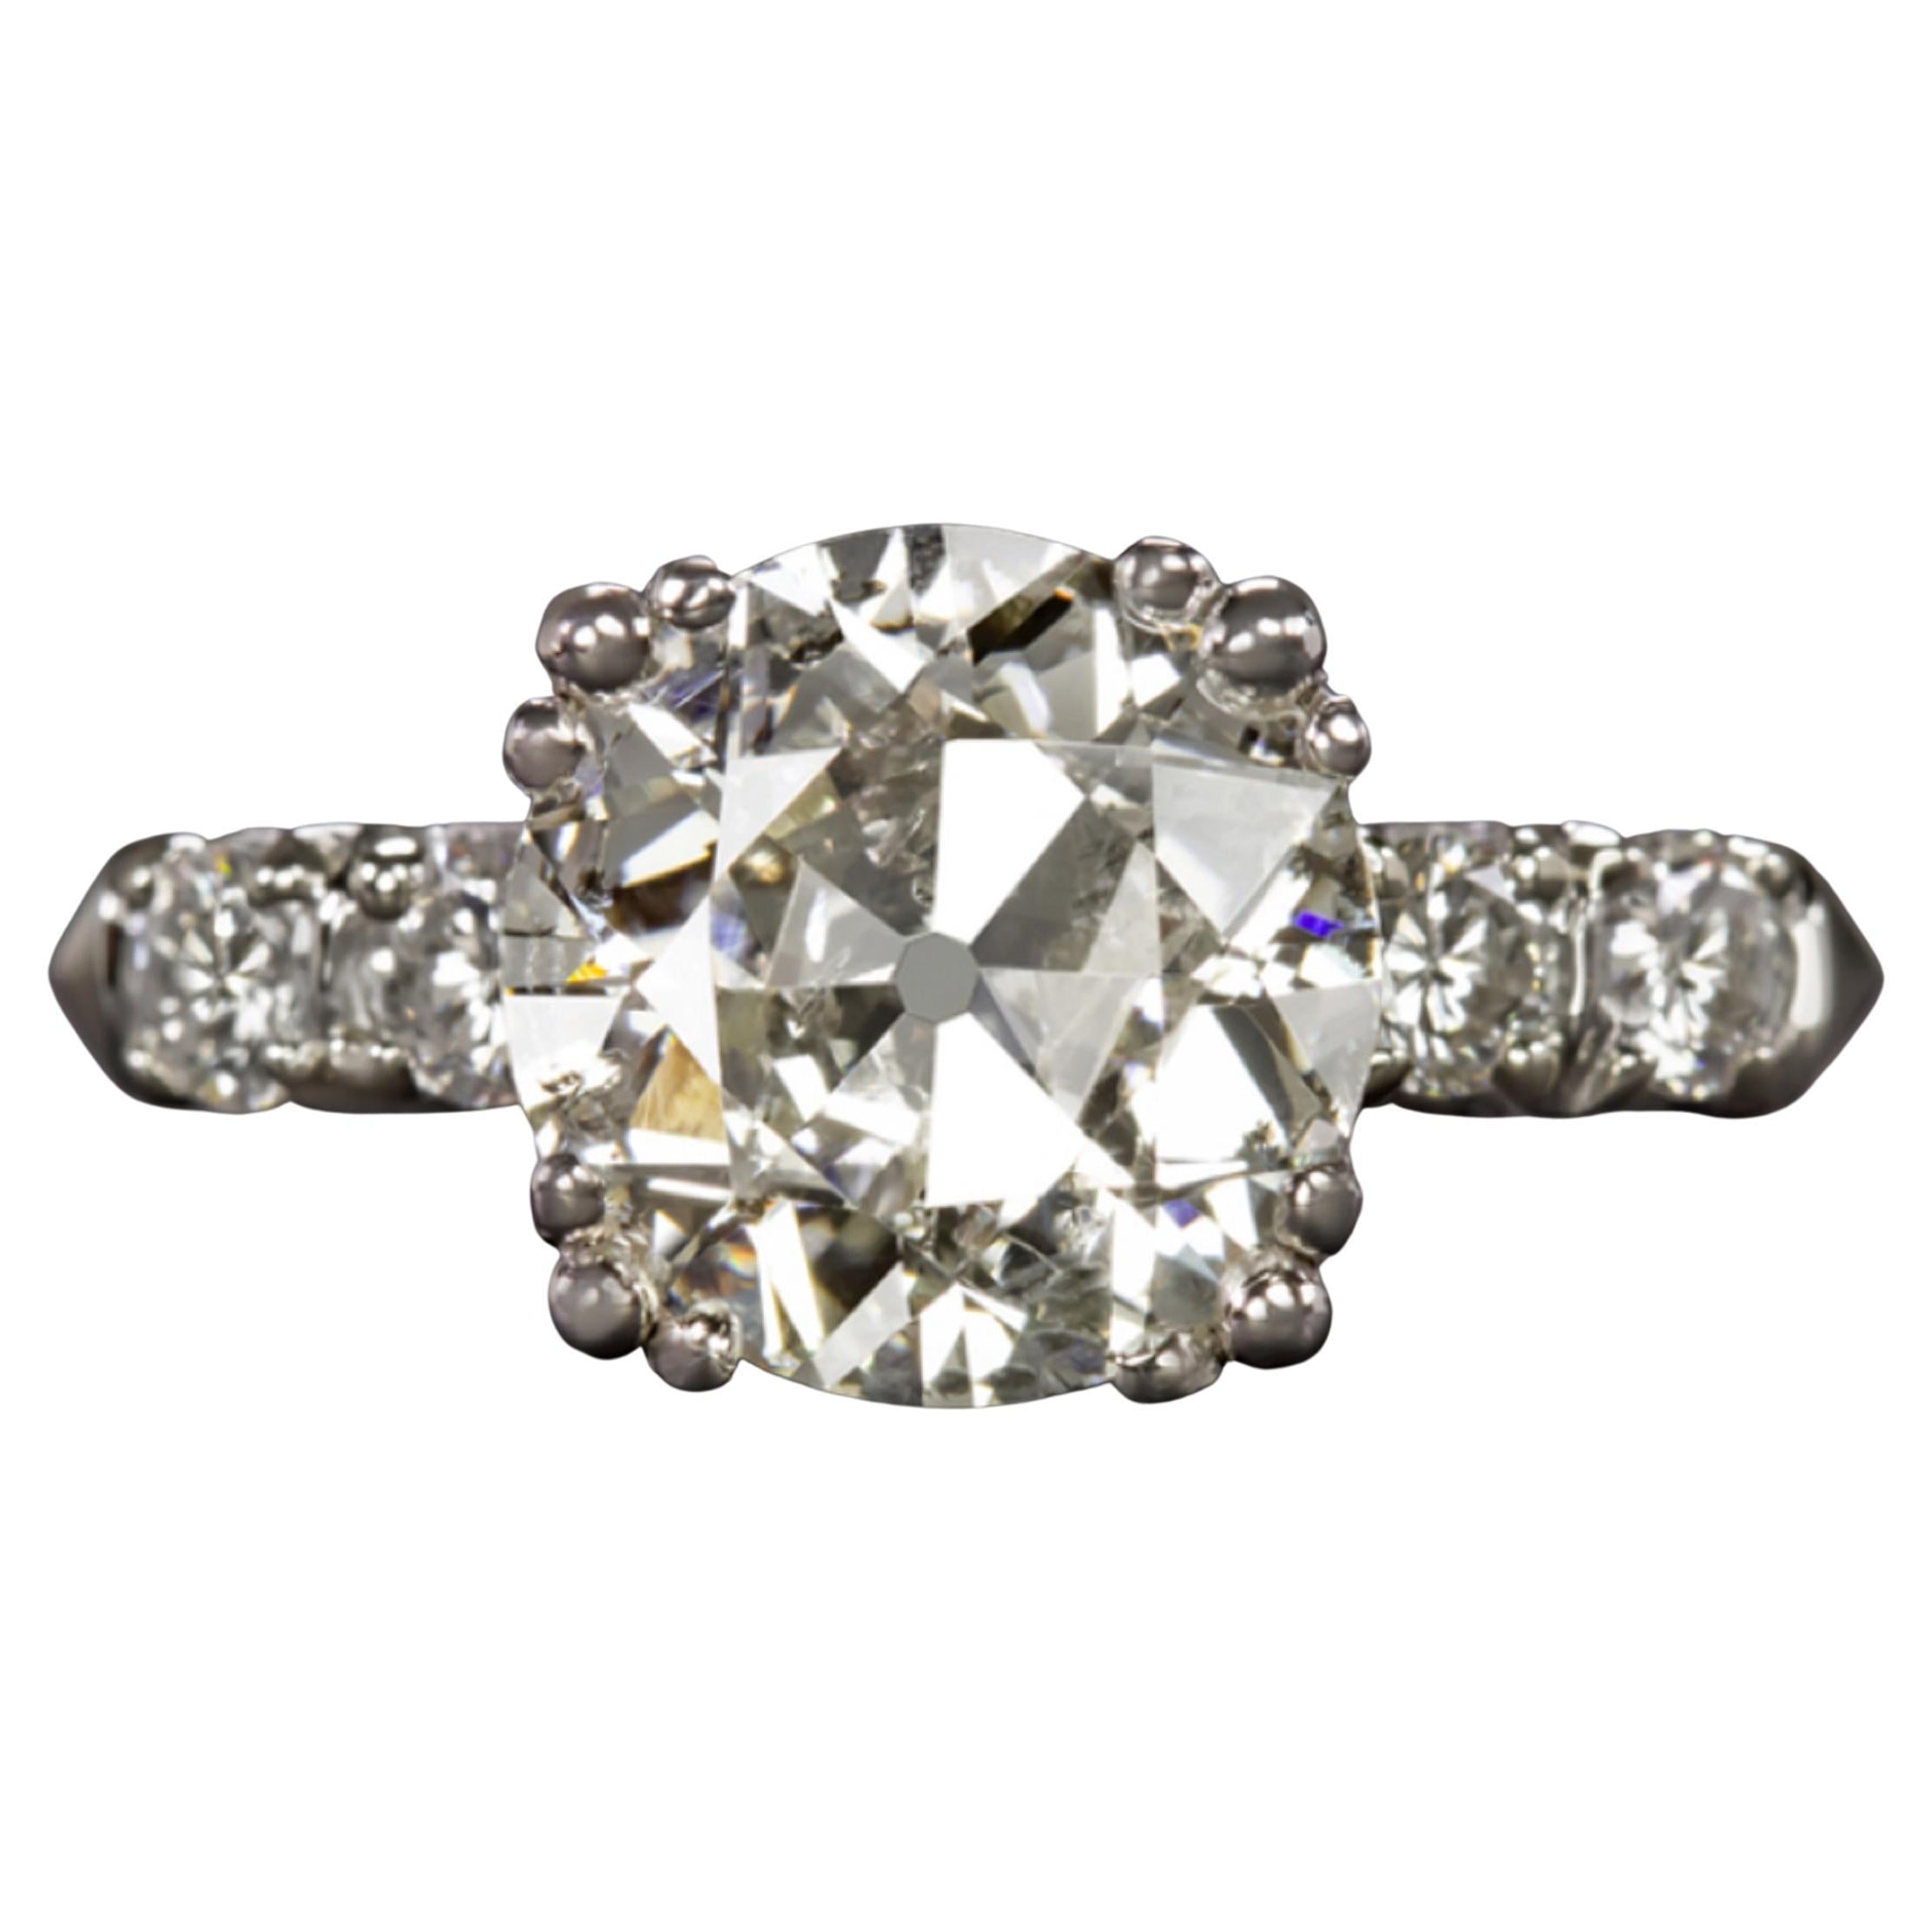 Louis Vuitton, A platinum ring with diamonds ca. 2.33 ct in total